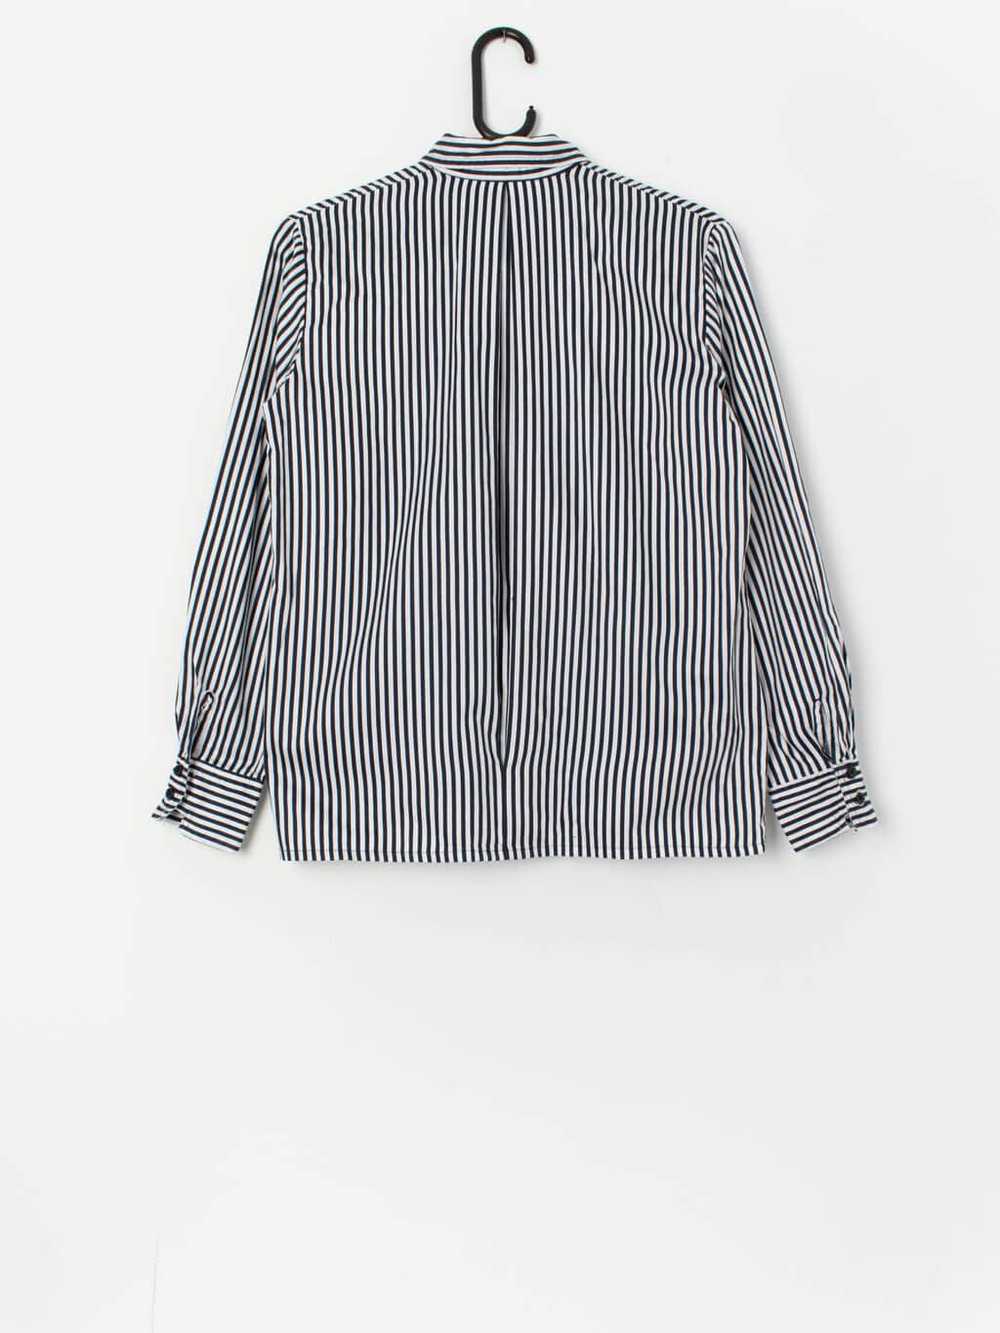 Vintage Laird-Portch striped blouse in navy and w… - image 3